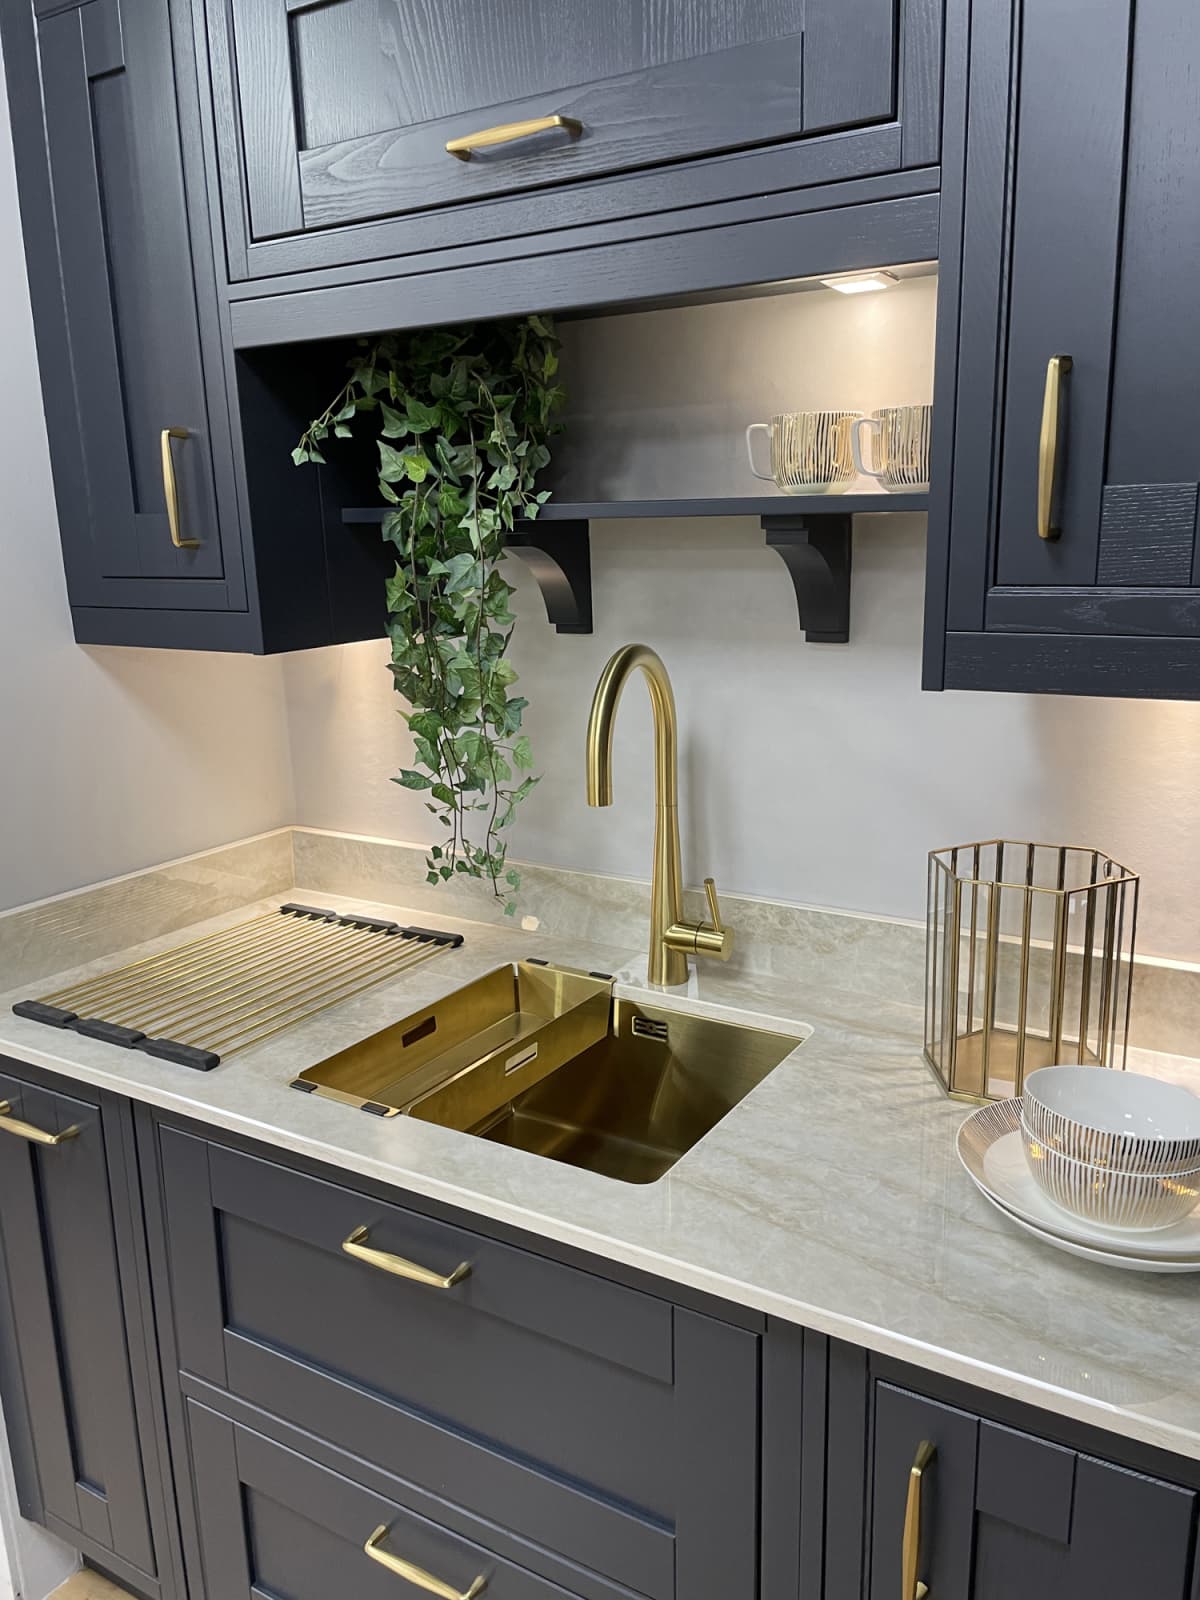 A gold sink inset in white marble kitchen counter with navy, wood grain effect cabinets above